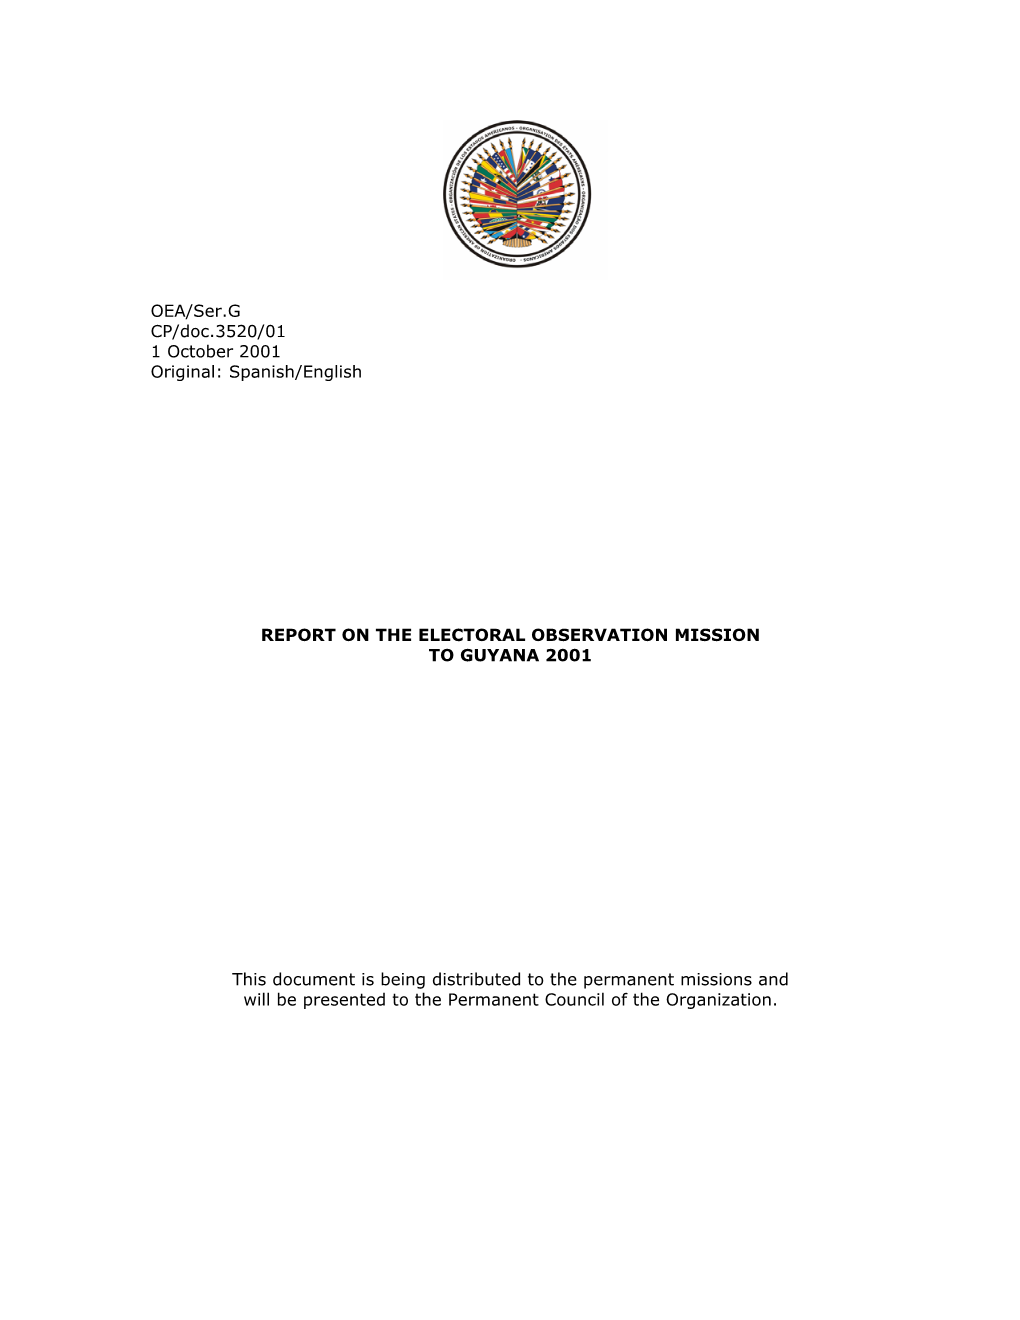 Report on the OAS Electoral Observation Mission to Guyana 2001